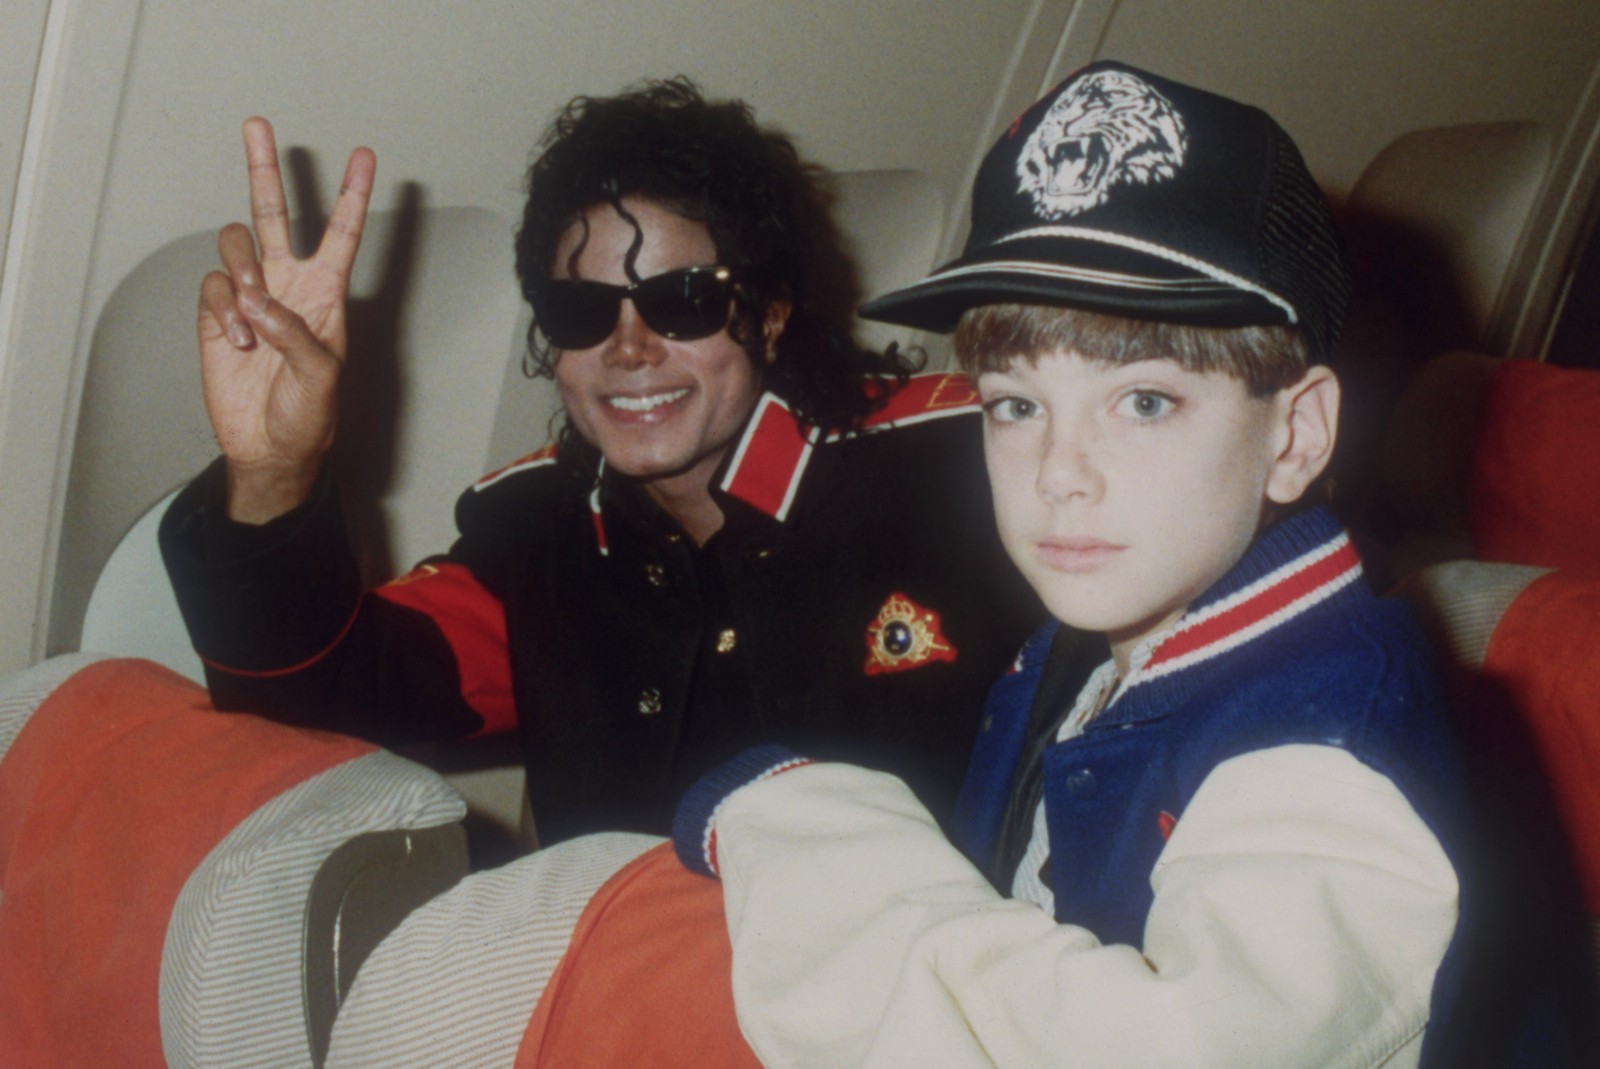 Shane Dawson Comes In Support Of Paris Jackson Following The HBO Documentary, Leaving Neverland